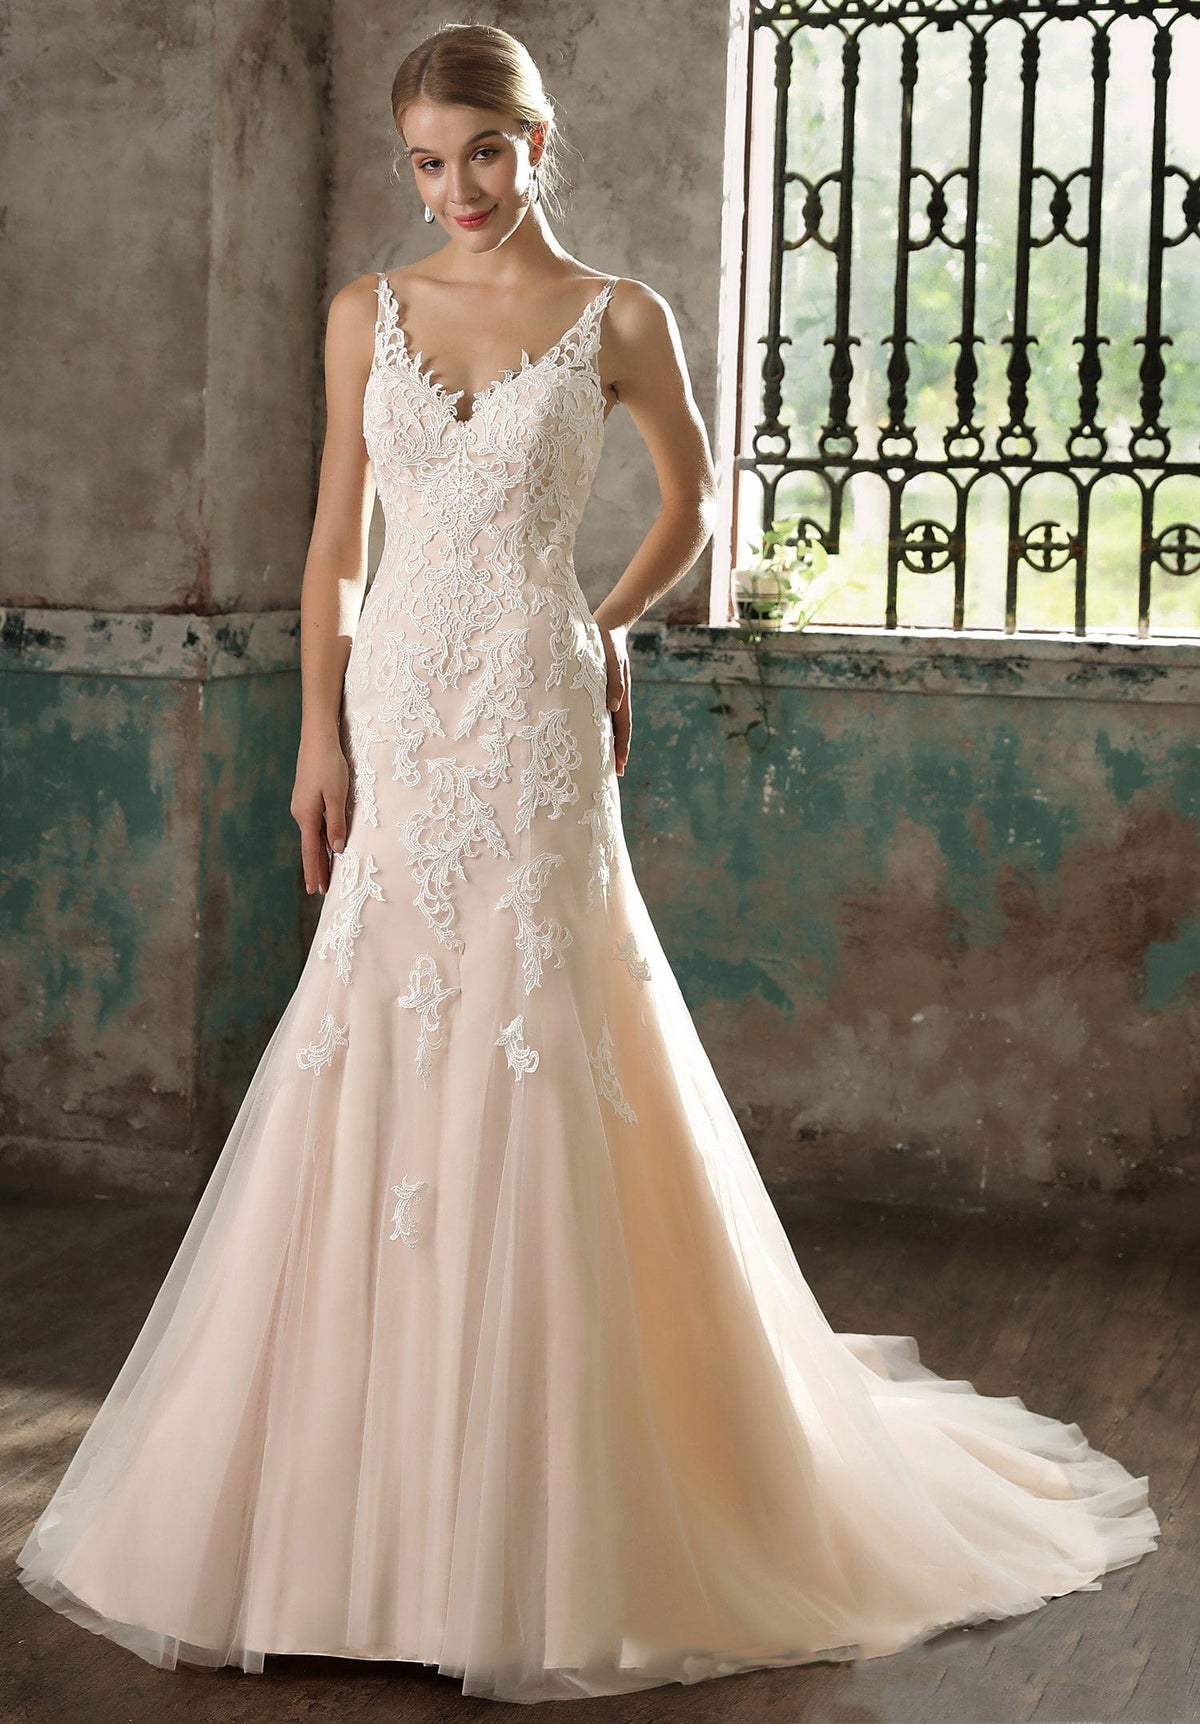 Spaghetti Strap Low Back Mermaid Classic Wedding Dress As Picture